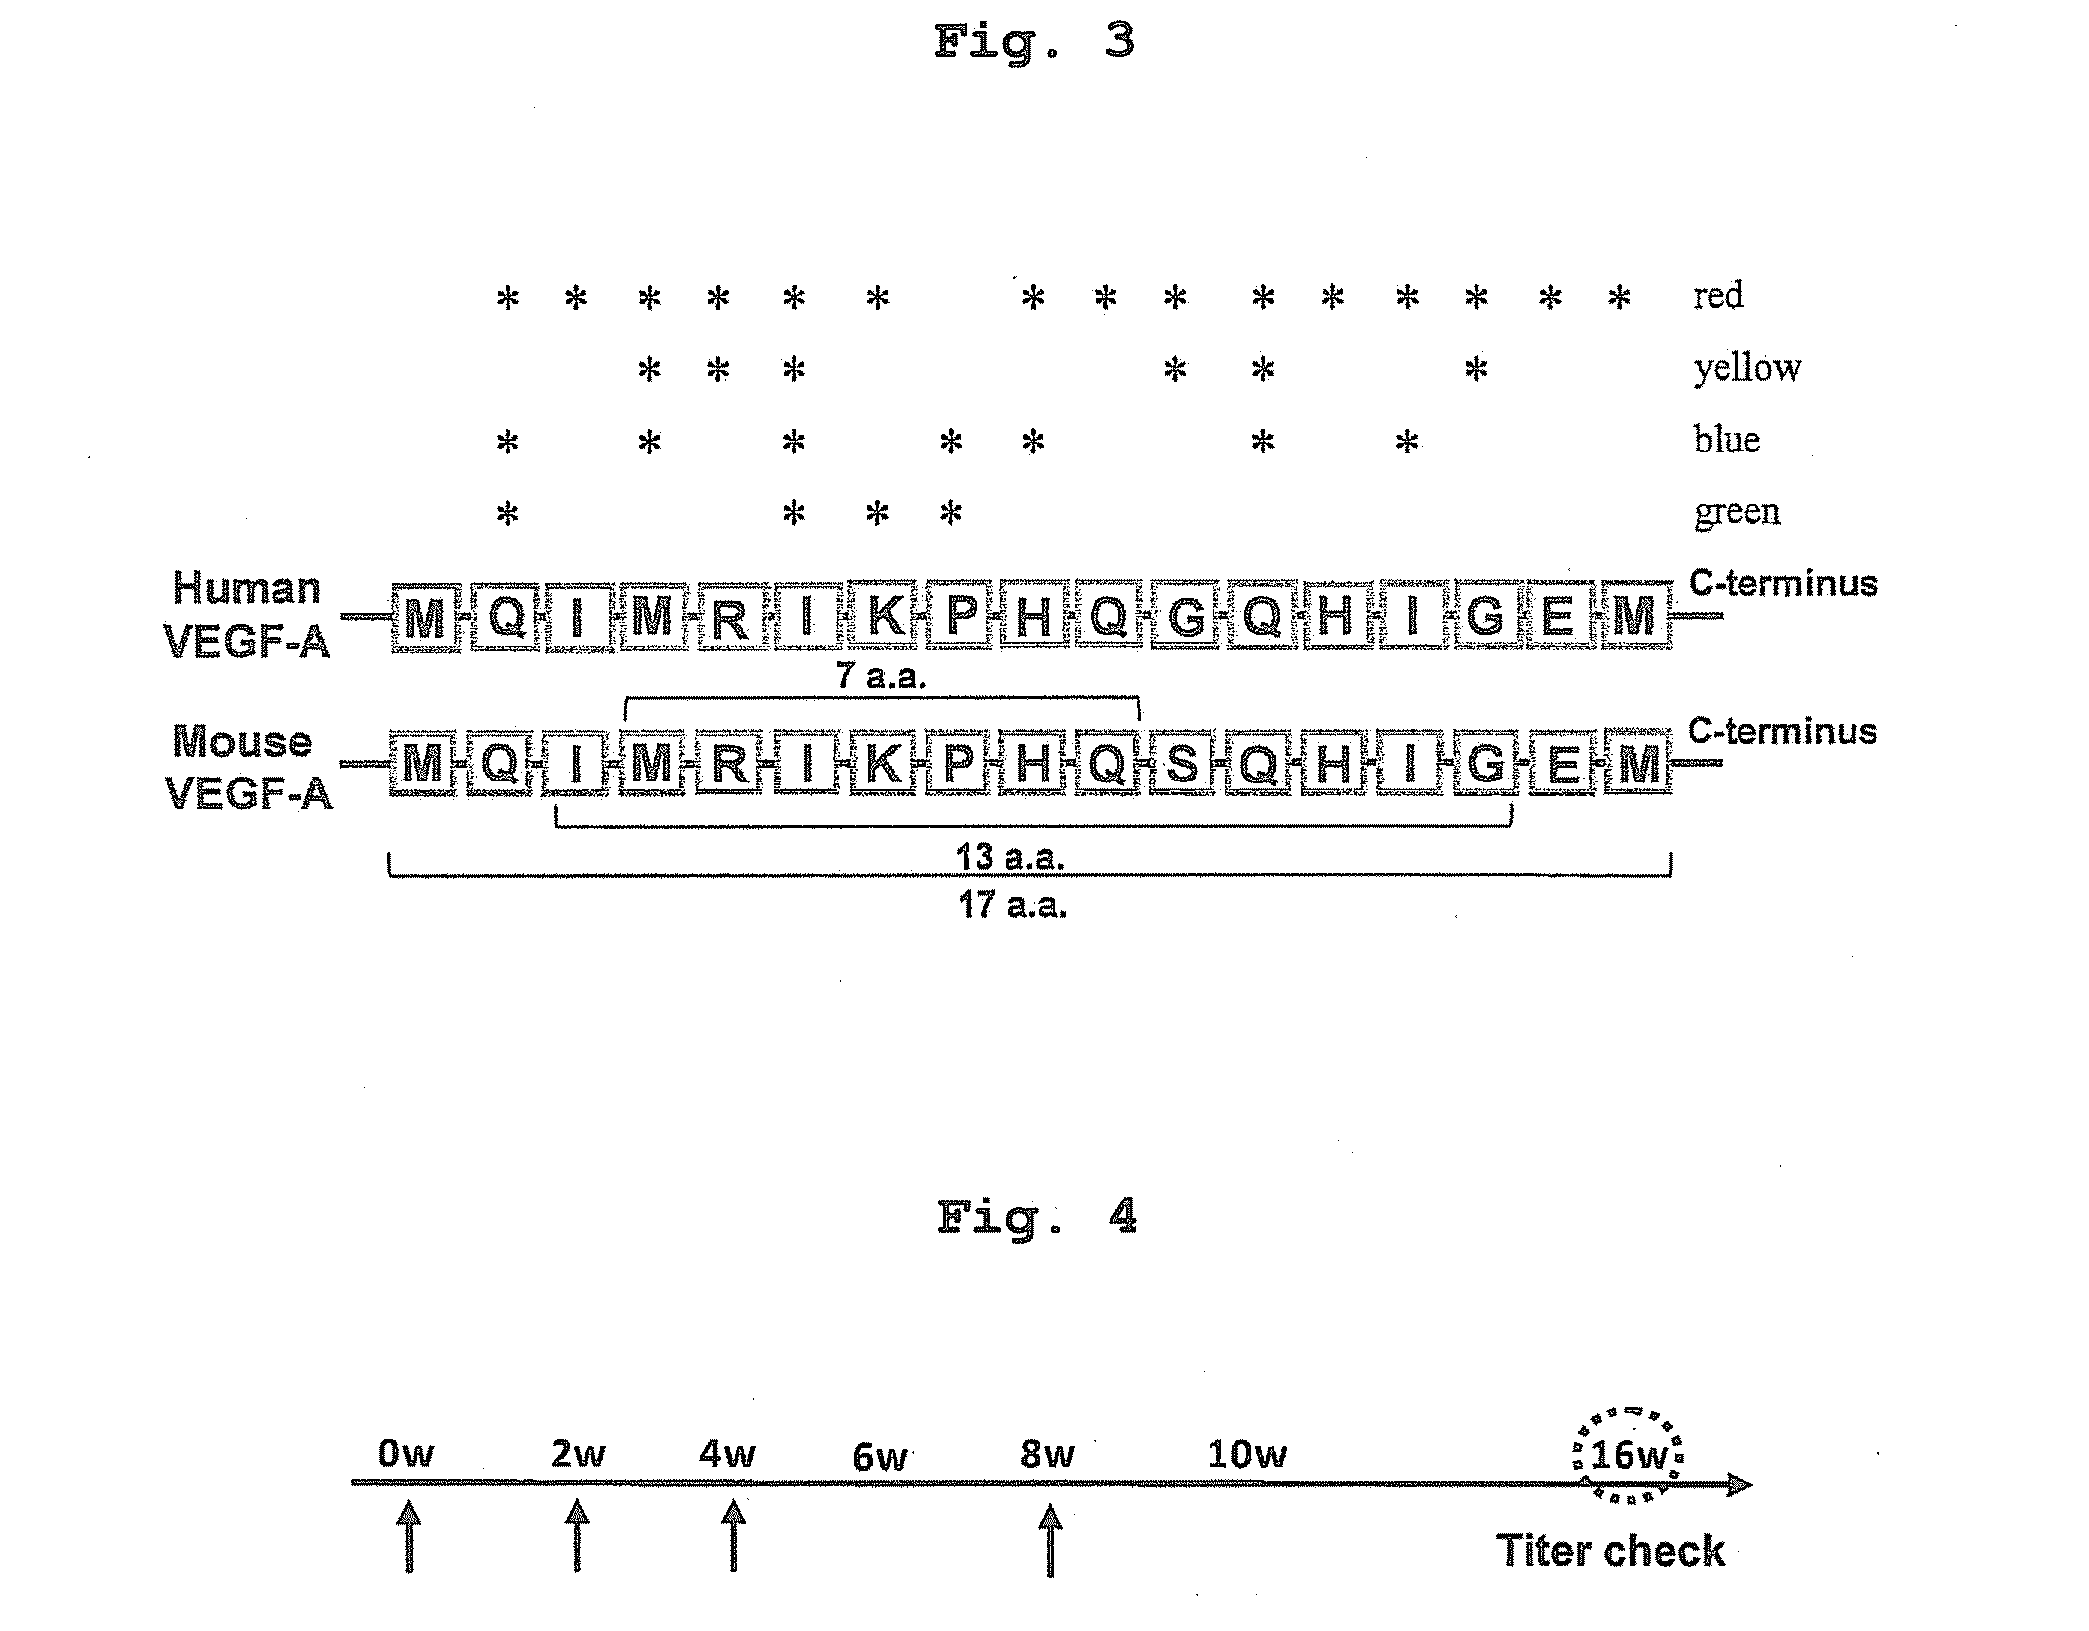 DNA vaccine containing vegf-specific epitope and/or angiopoietin-2-specific epitope